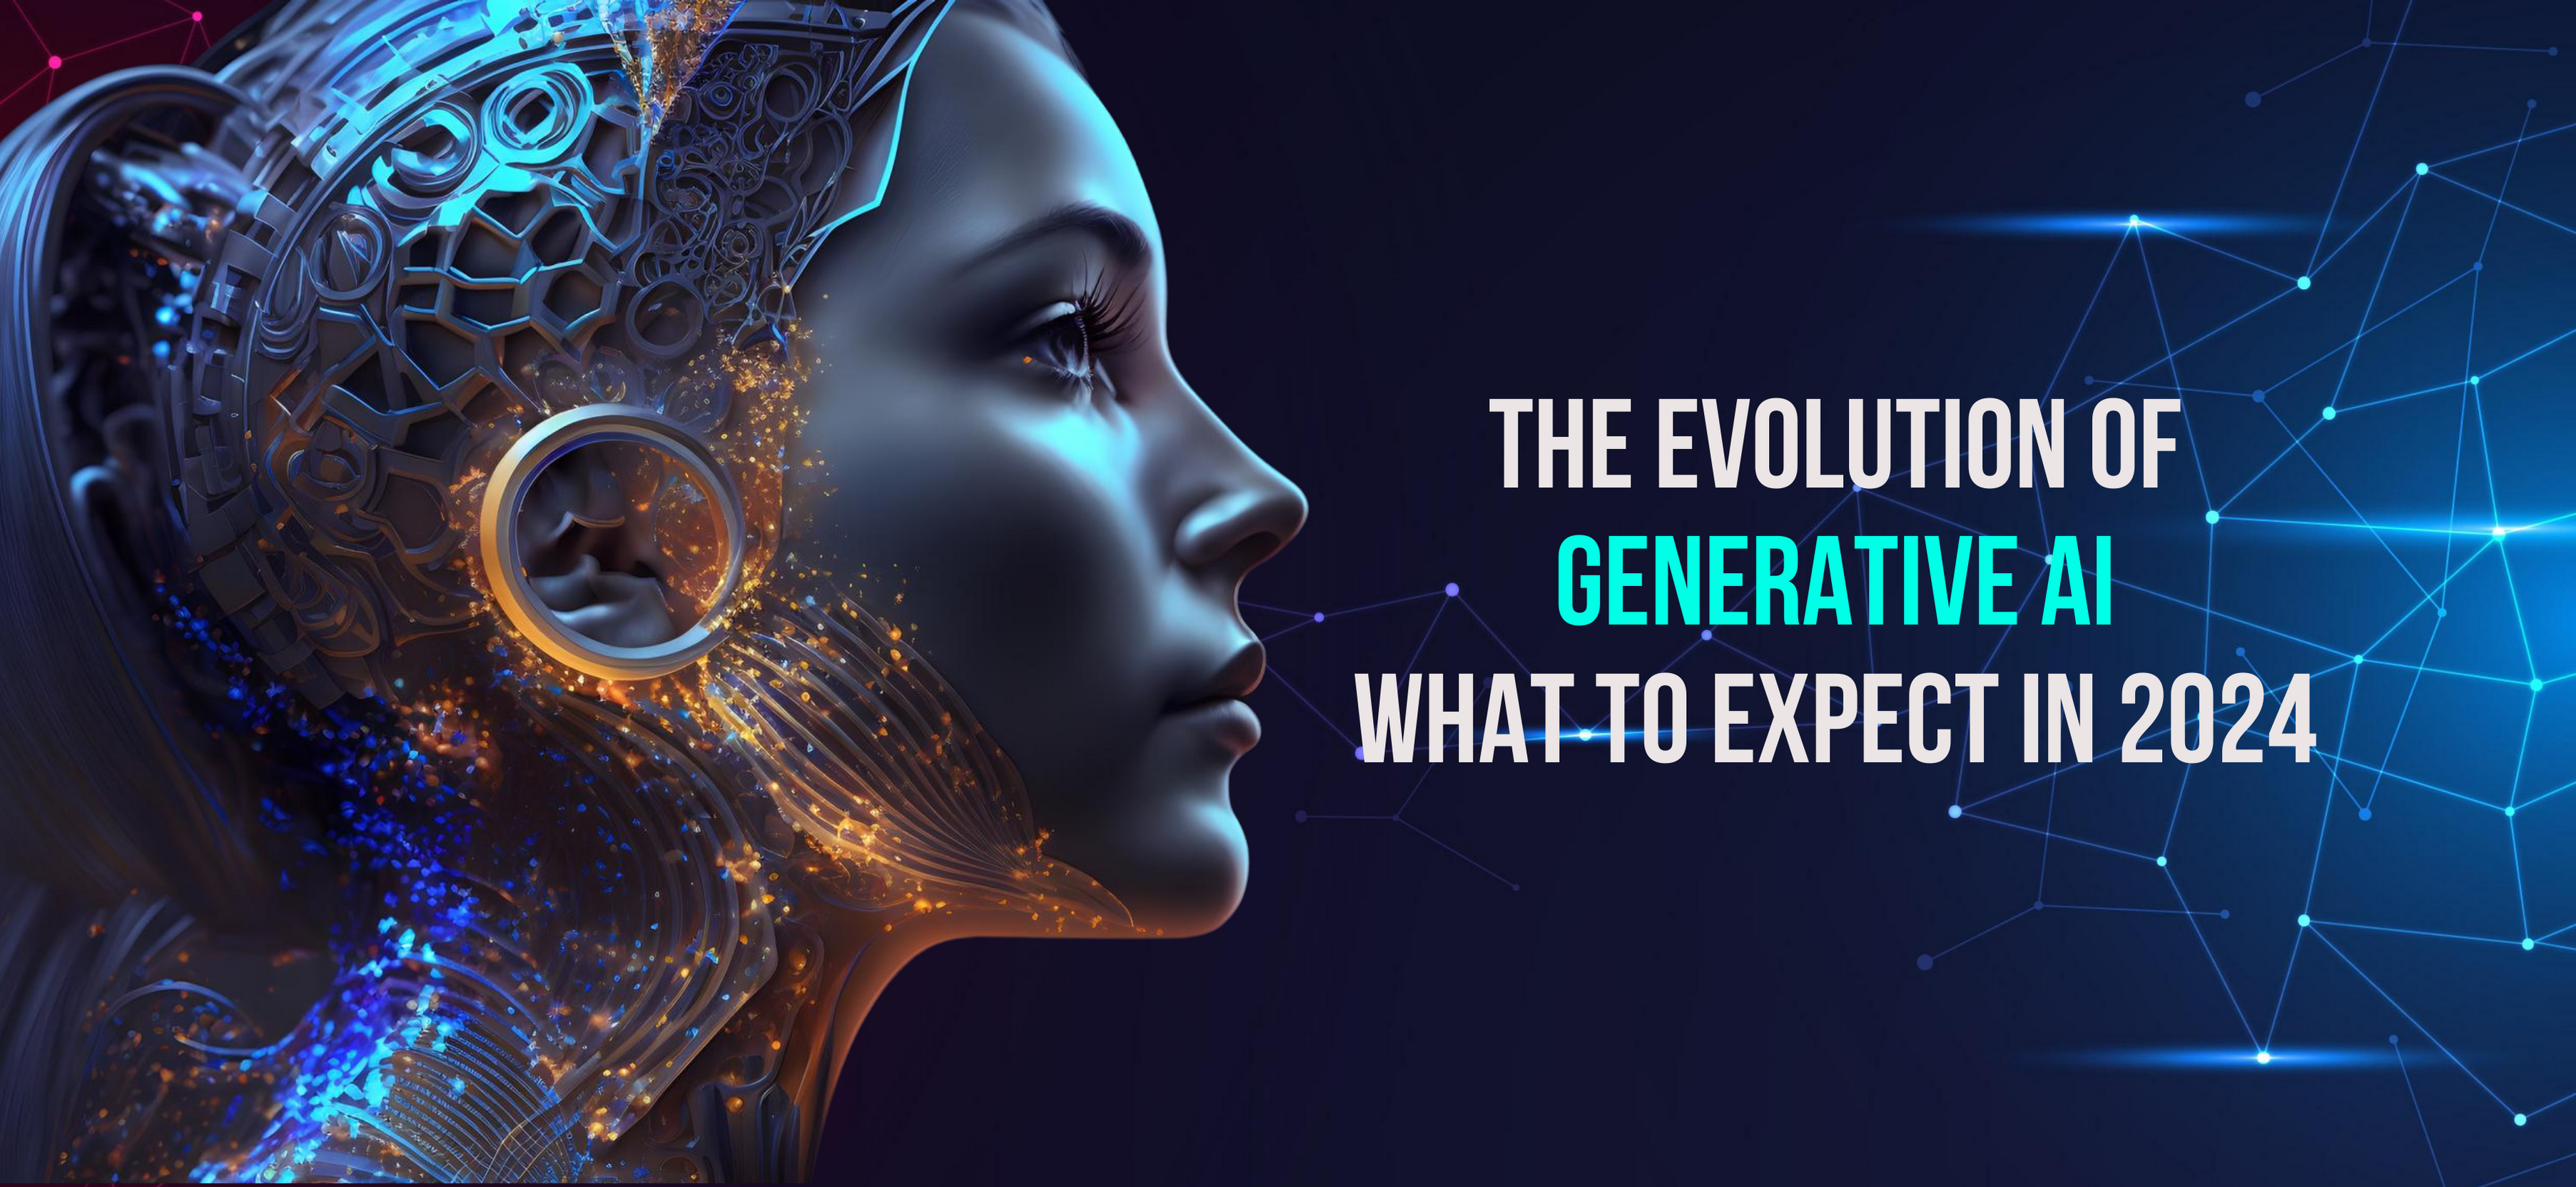 The Evolution of Generative AI: What to Expect in 2024 - Internet Soft